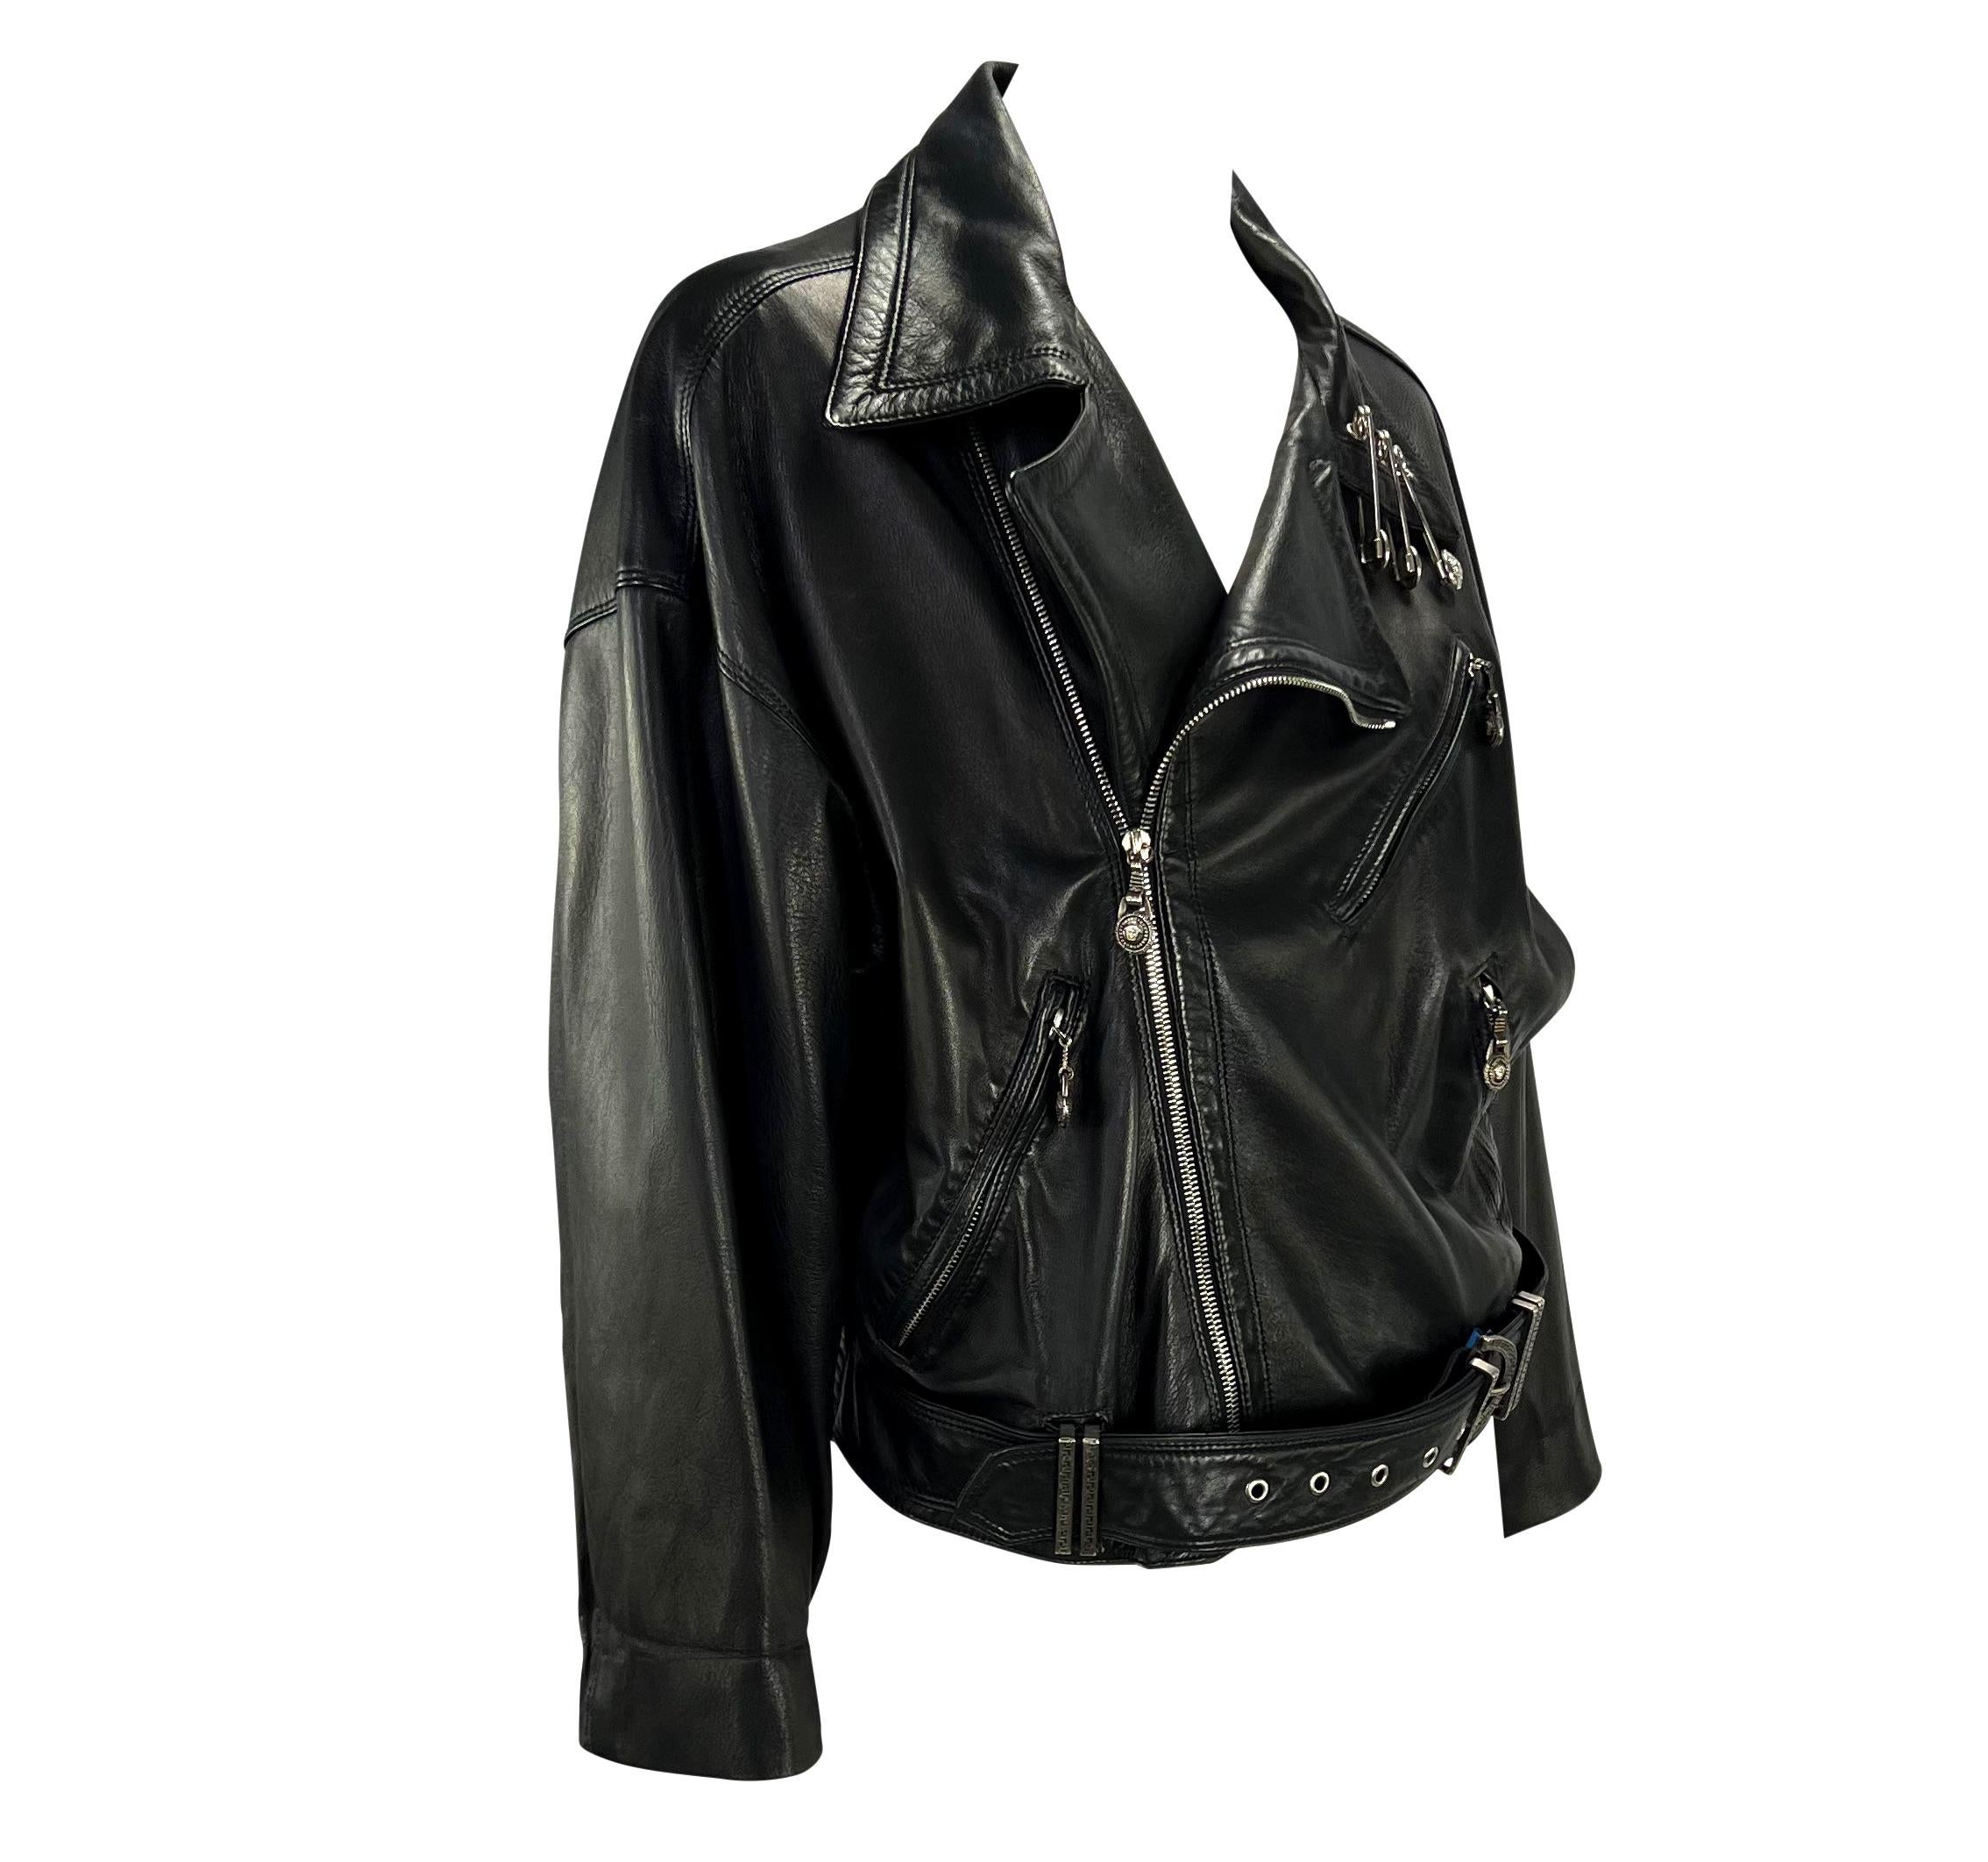 S/S 1994 Gianni Versace Medusa Safety Pin Leather Belted Moto Jacket For Sale 1